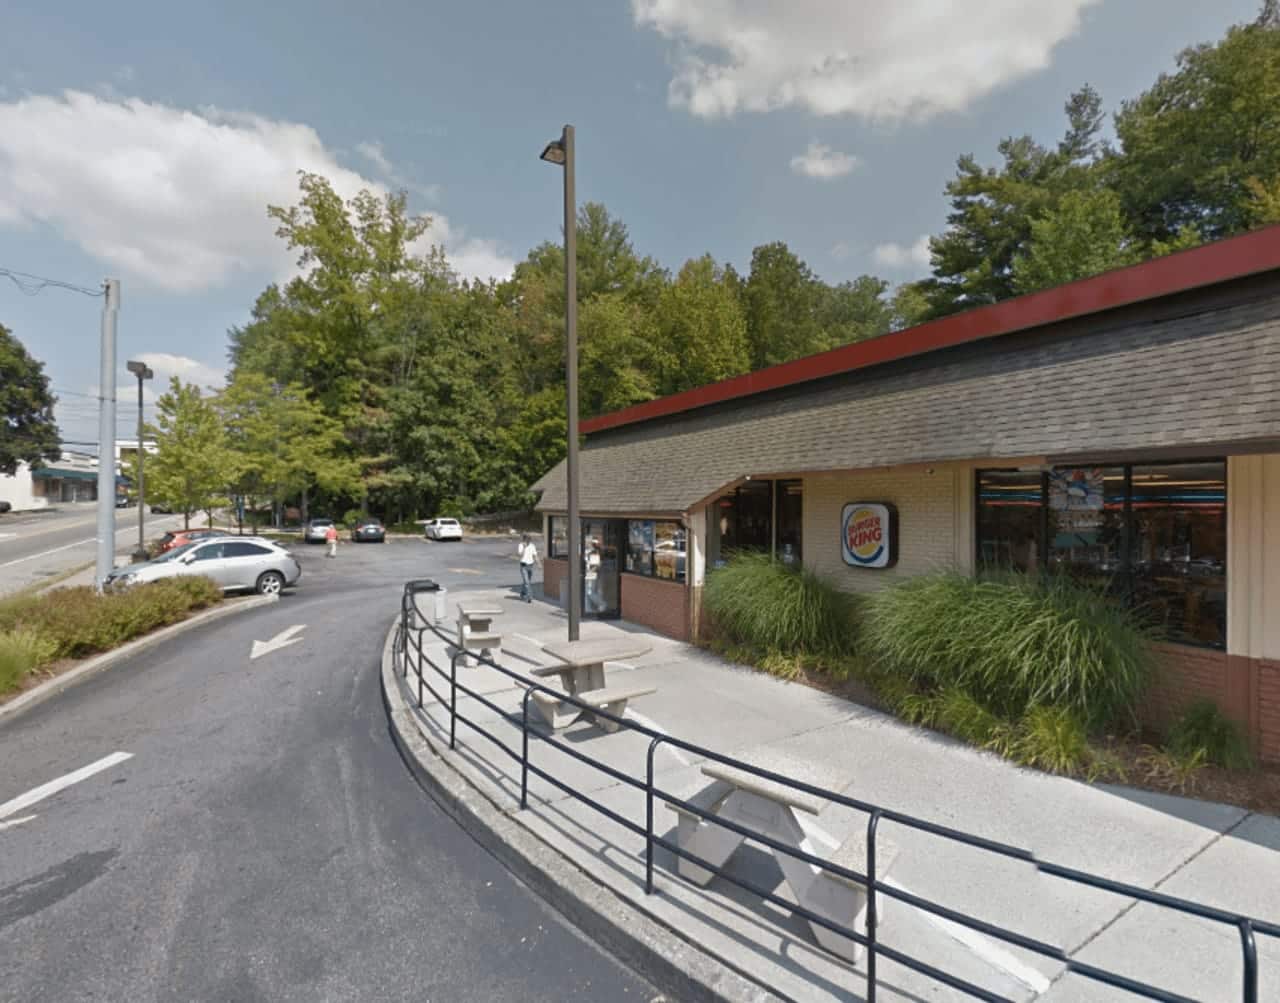 The Burger King in Mount Kisco is temporarily closed while fire officials inspect the building.